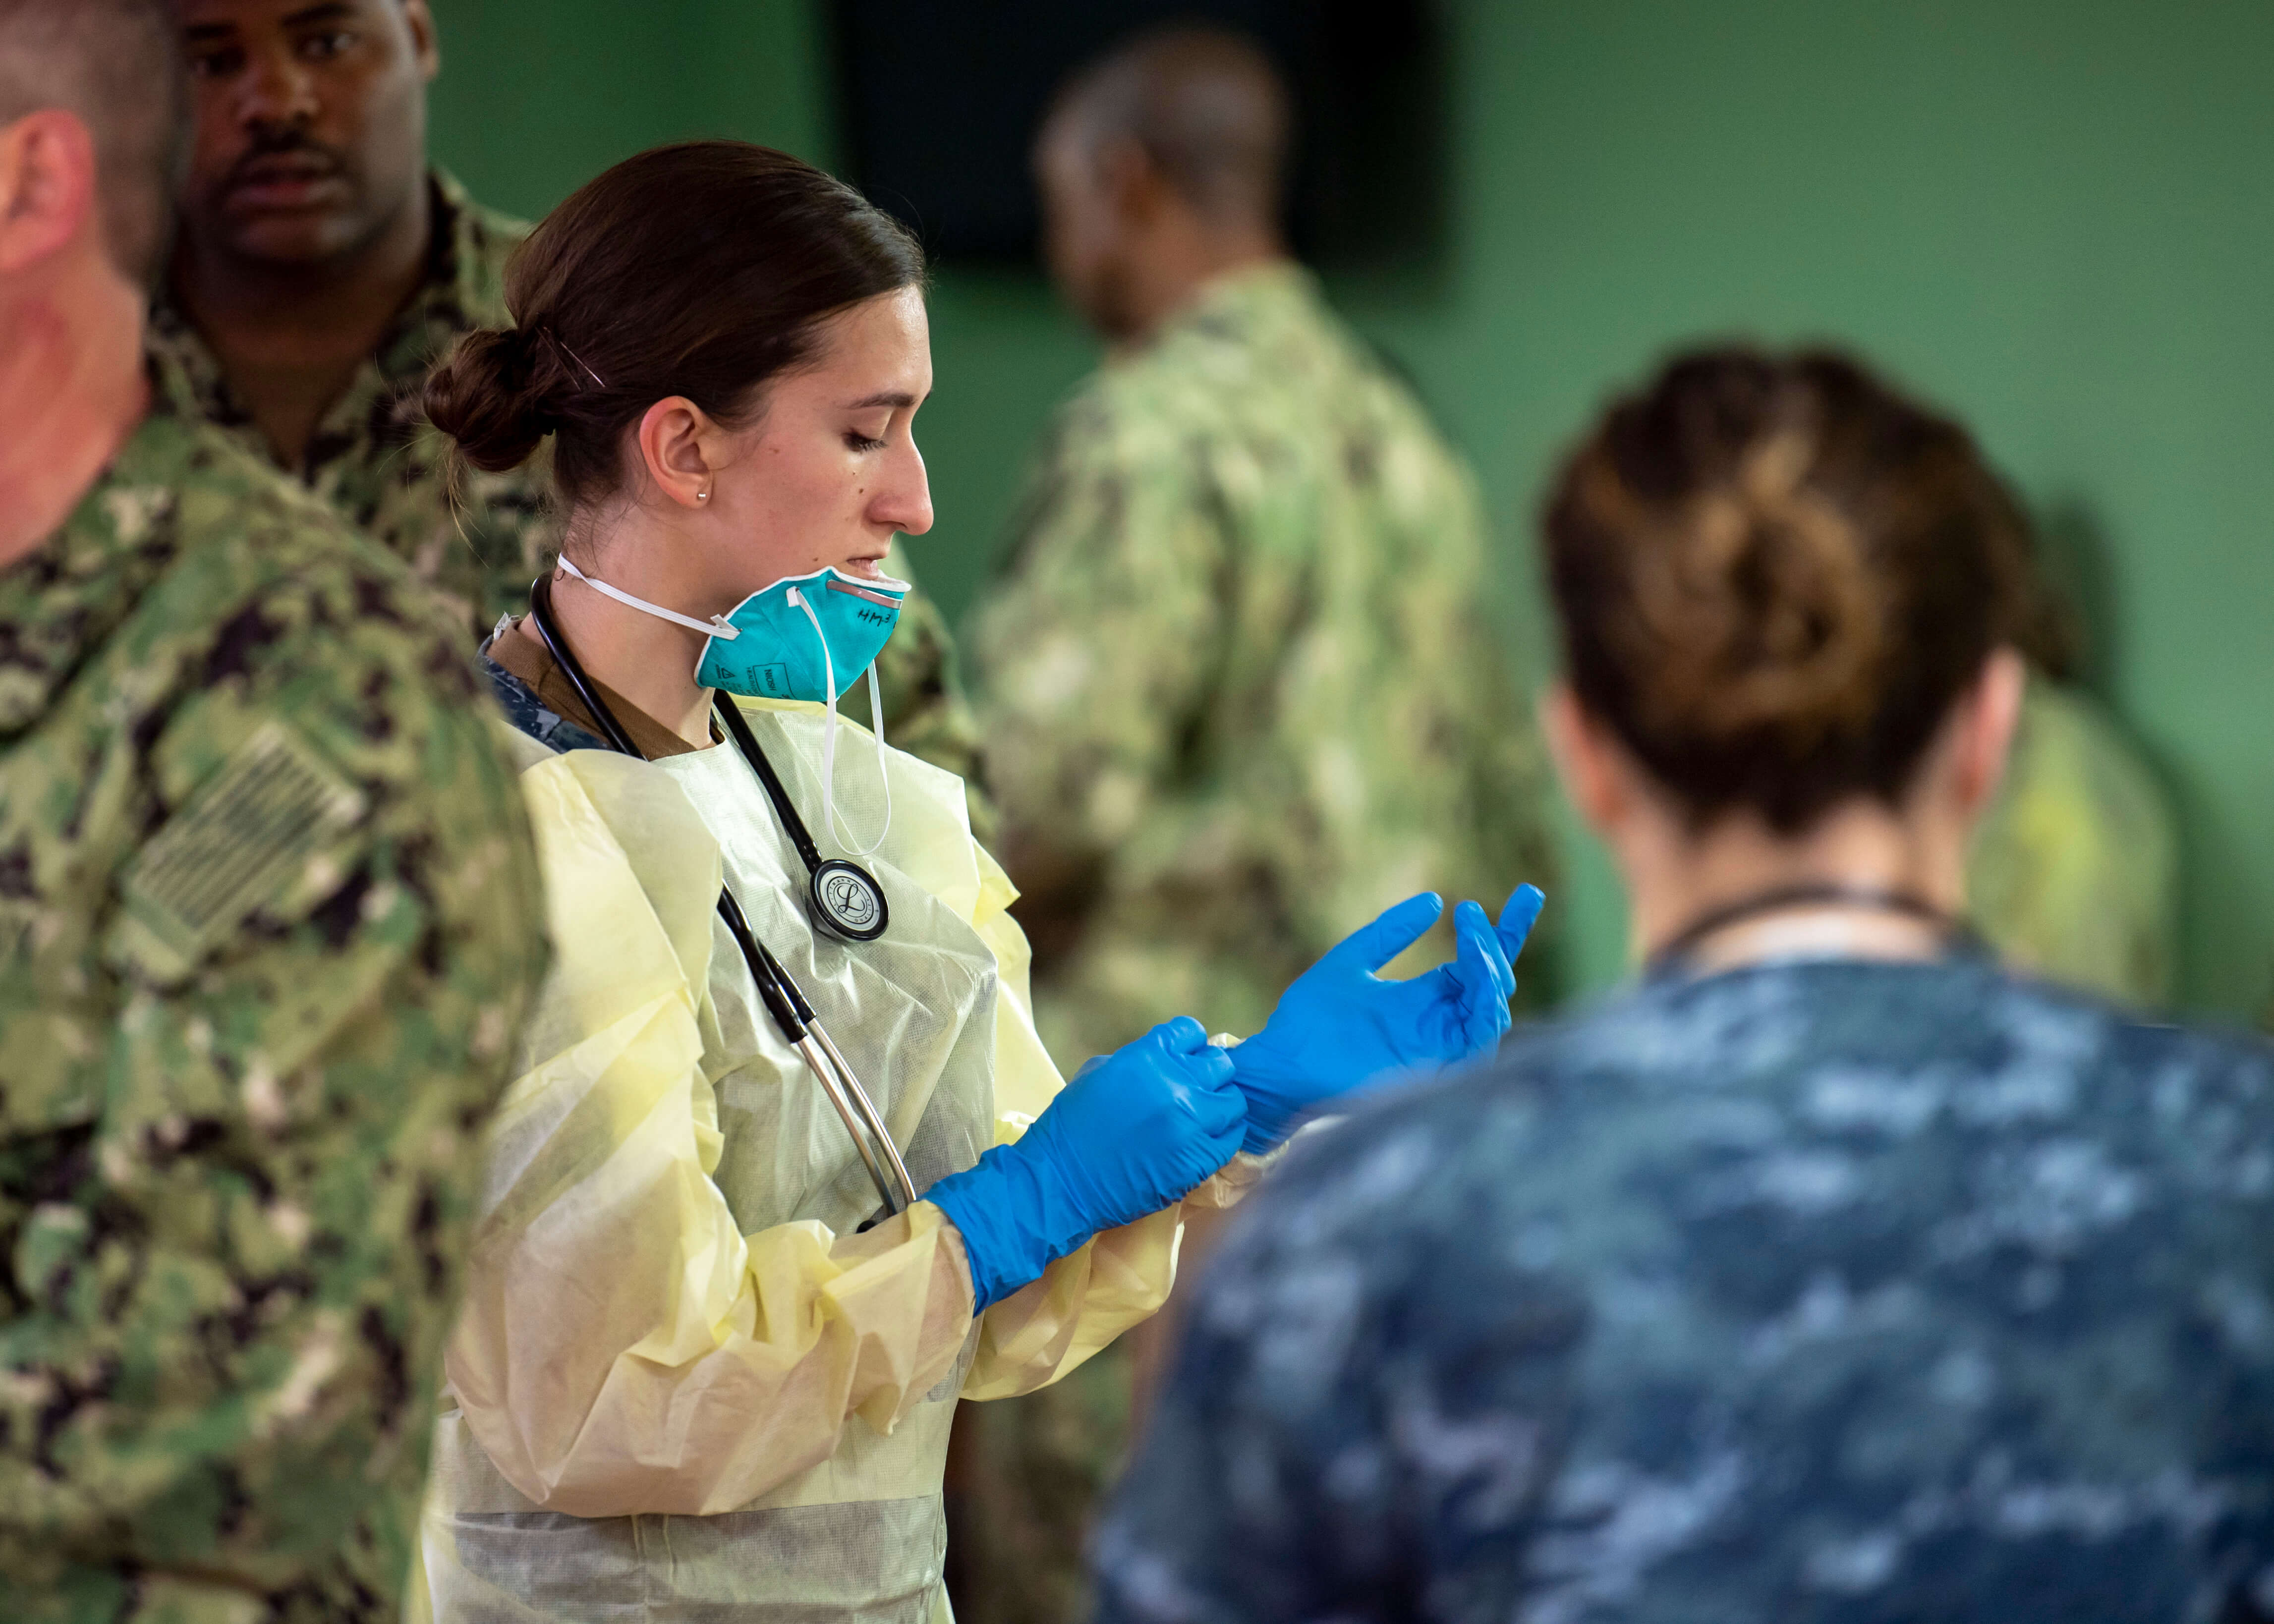 Hospital Corpsman dons surgical gloves aboard the hospital ship USNS Mercy. © U.S. Pacific Fleet / Flickr